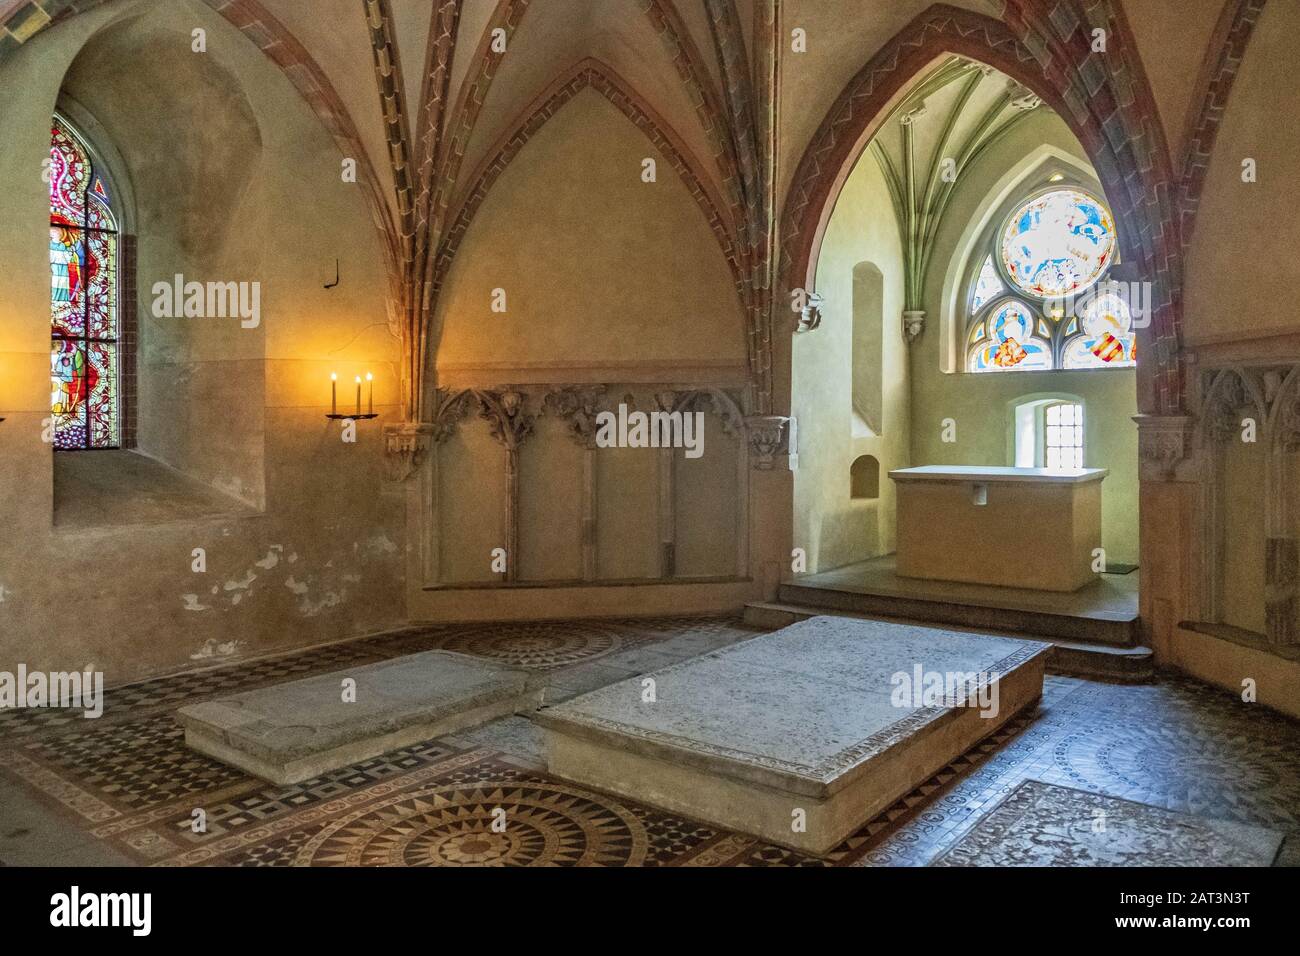 Malbork, Pomerania / Poland - 2019/08/24: Interior of the St. Anna Chapel with the historic gravestones in the High Castle part of the Medieval Teutonic Order castle and monastery in Malbork, Poland Stock Photo